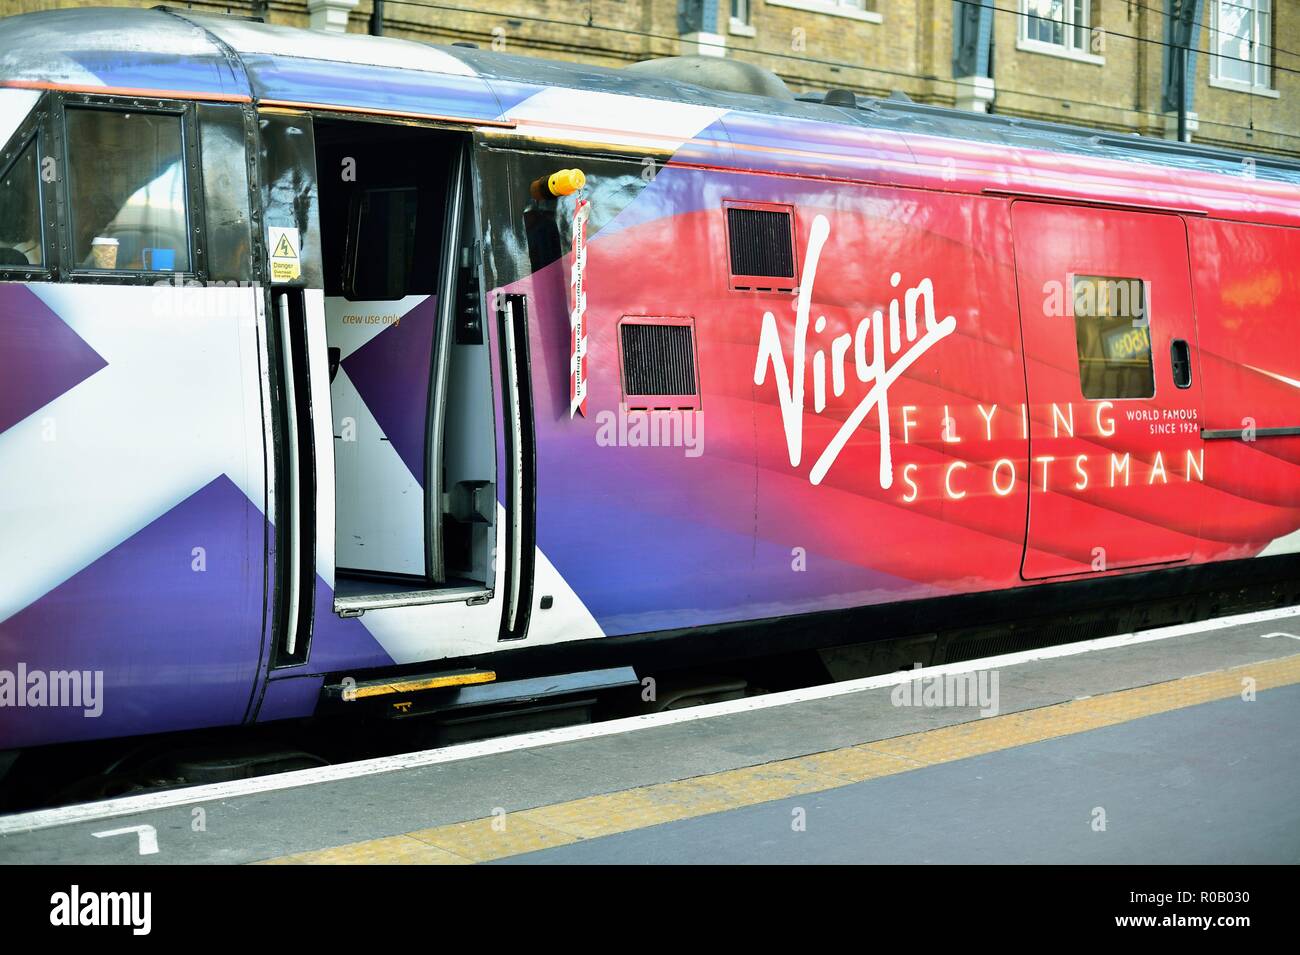 London, England, United Kingdom. Virgin Trains locomotive that lead the famed Flying Scotsman train from Edinburgh after its arrival in London. Stock Photo